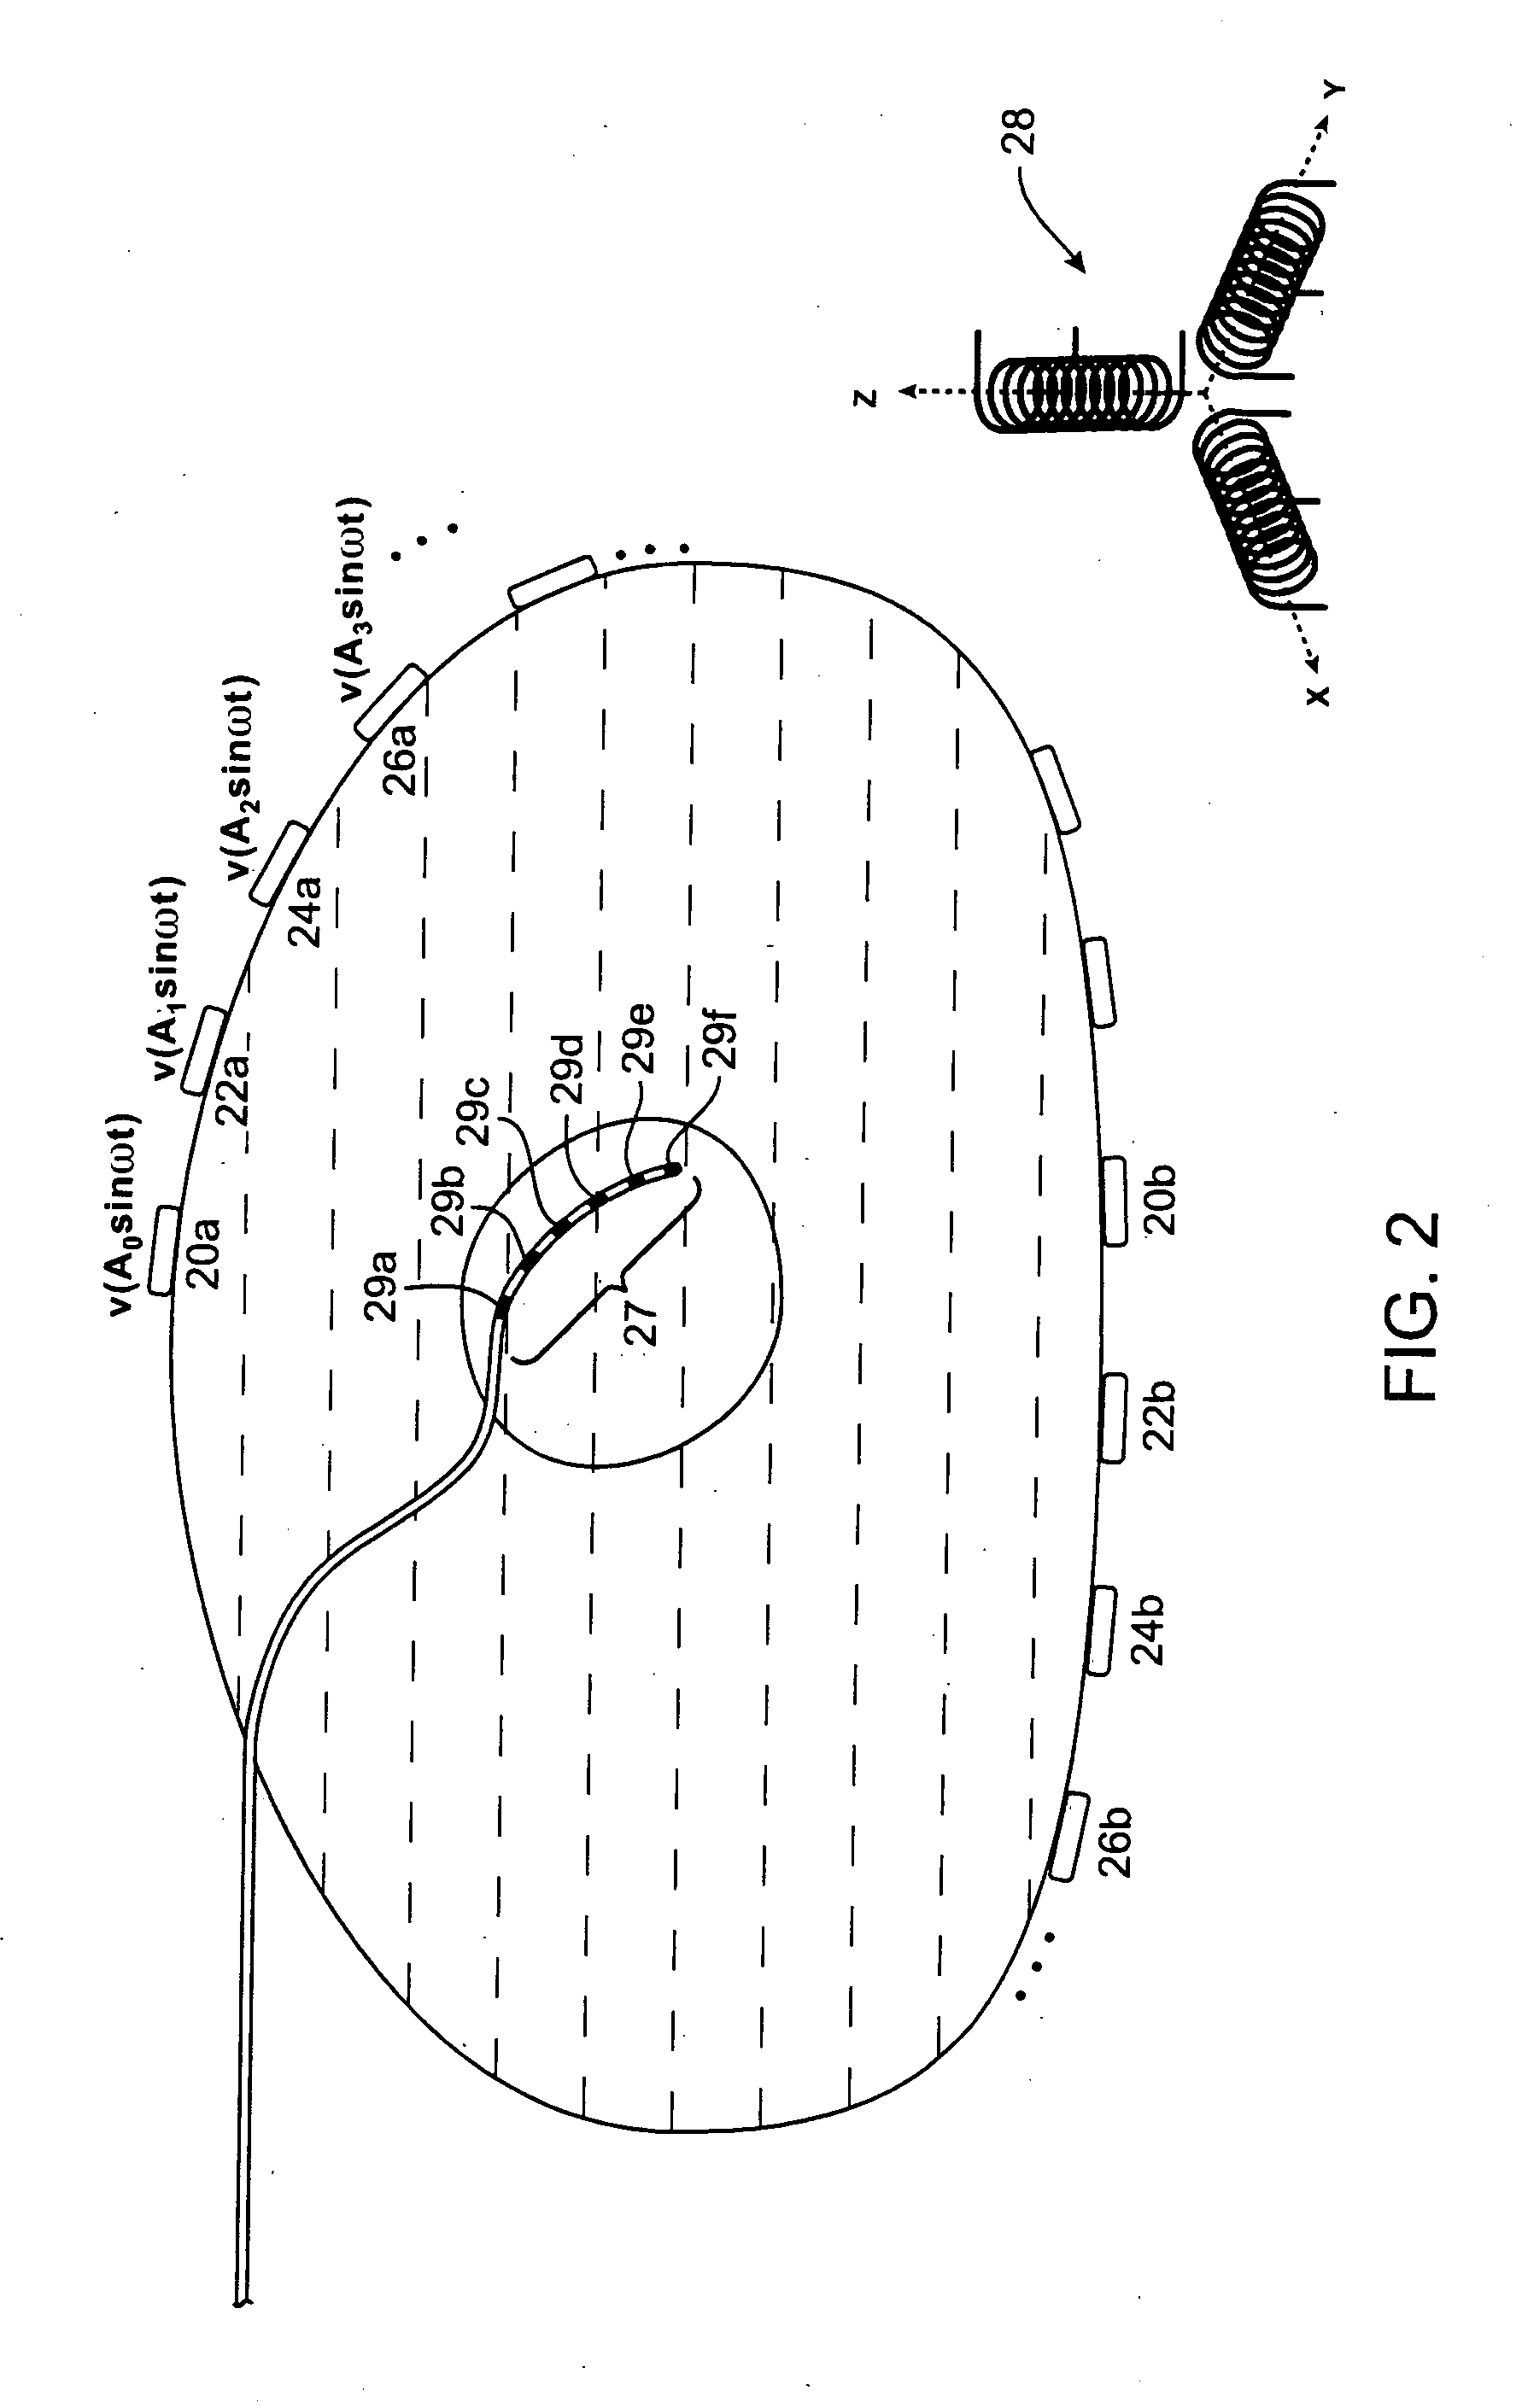 External continuous field tomography